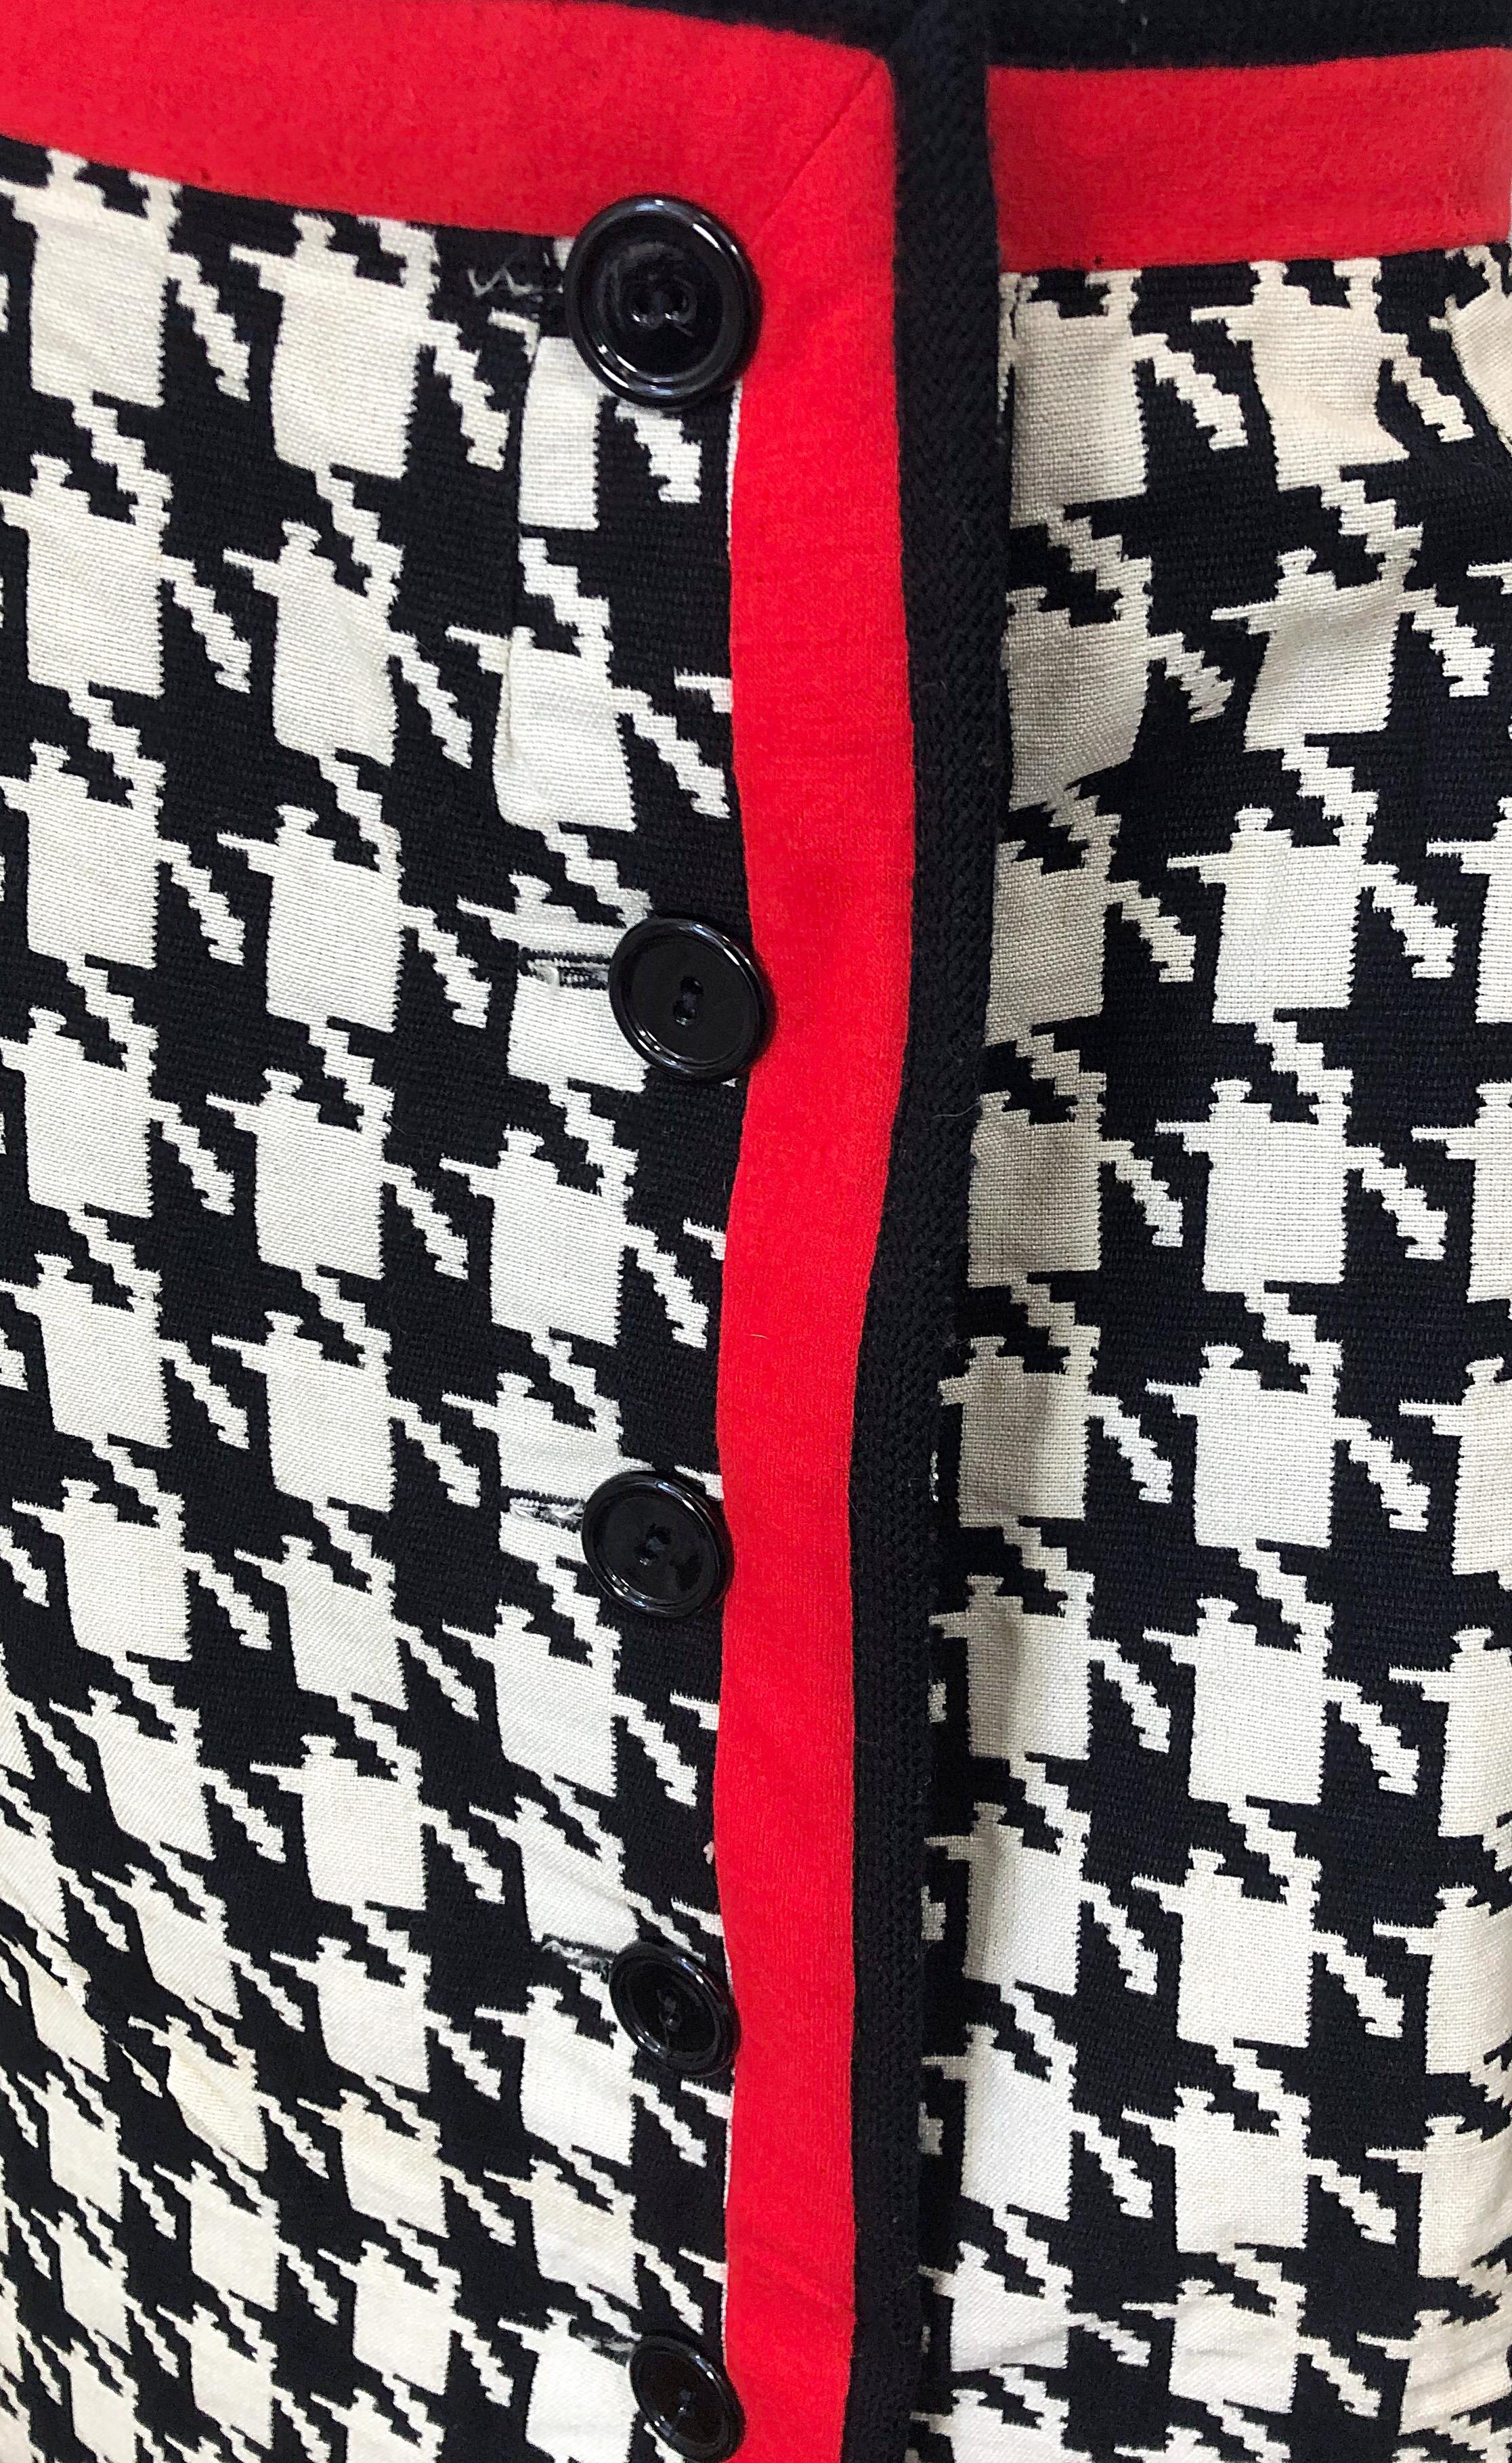 1970 Black and White and Red Houndstooth Striped Vintage 70s Maxi Skirt Excellent état - En vente à San Diego, CA